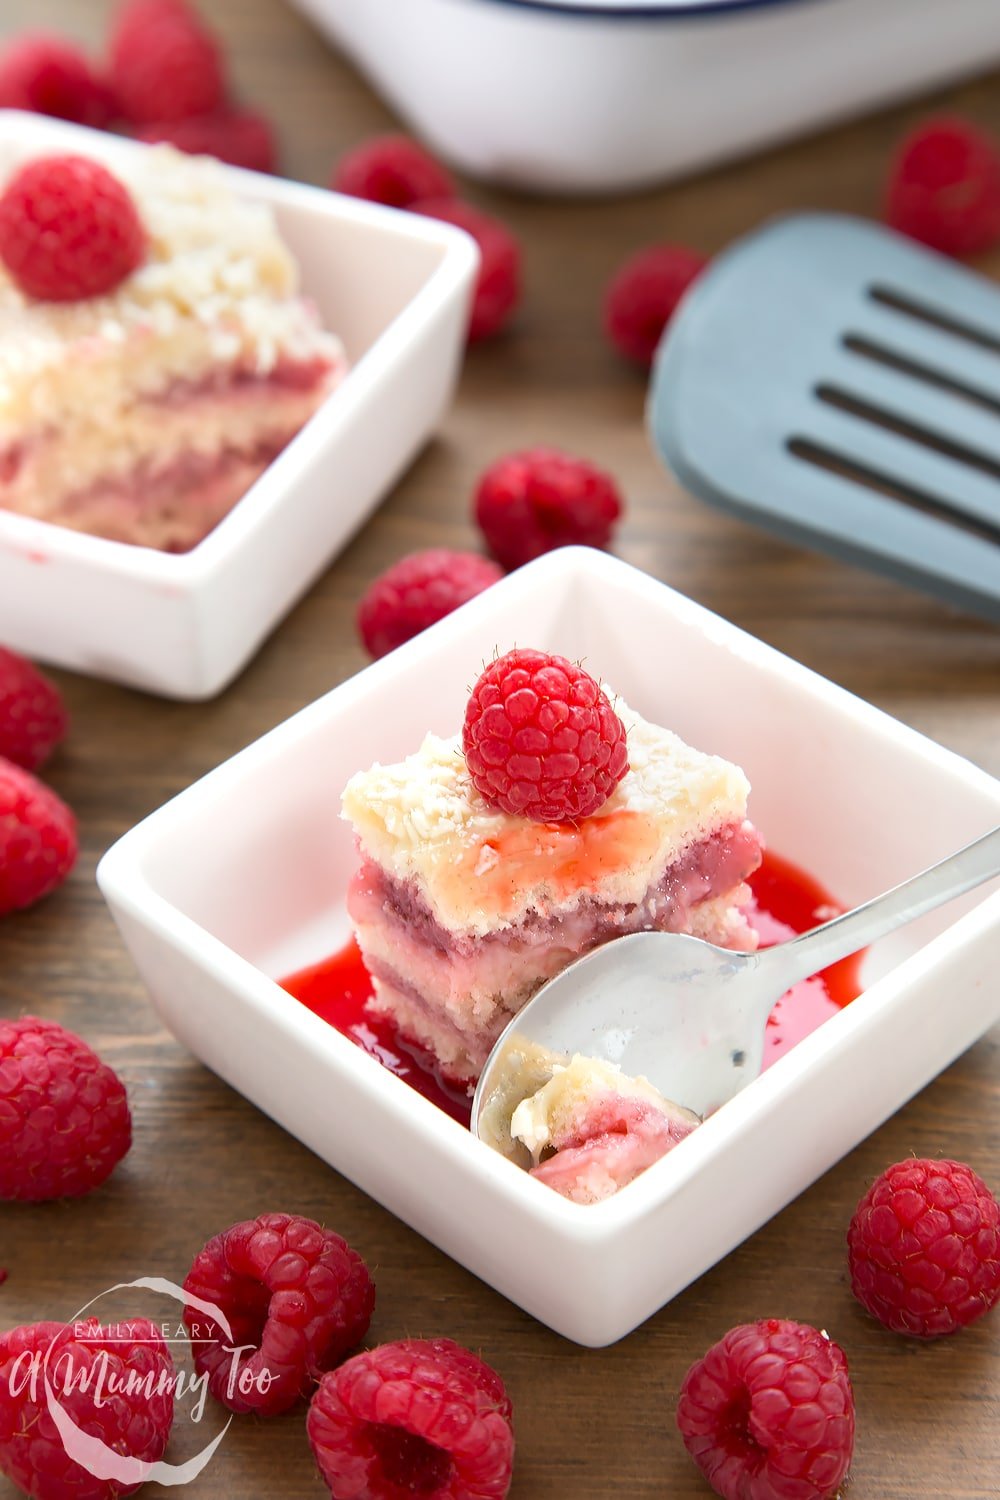 This deliciously sweet strawberry lasagne is inspired by Num Noms